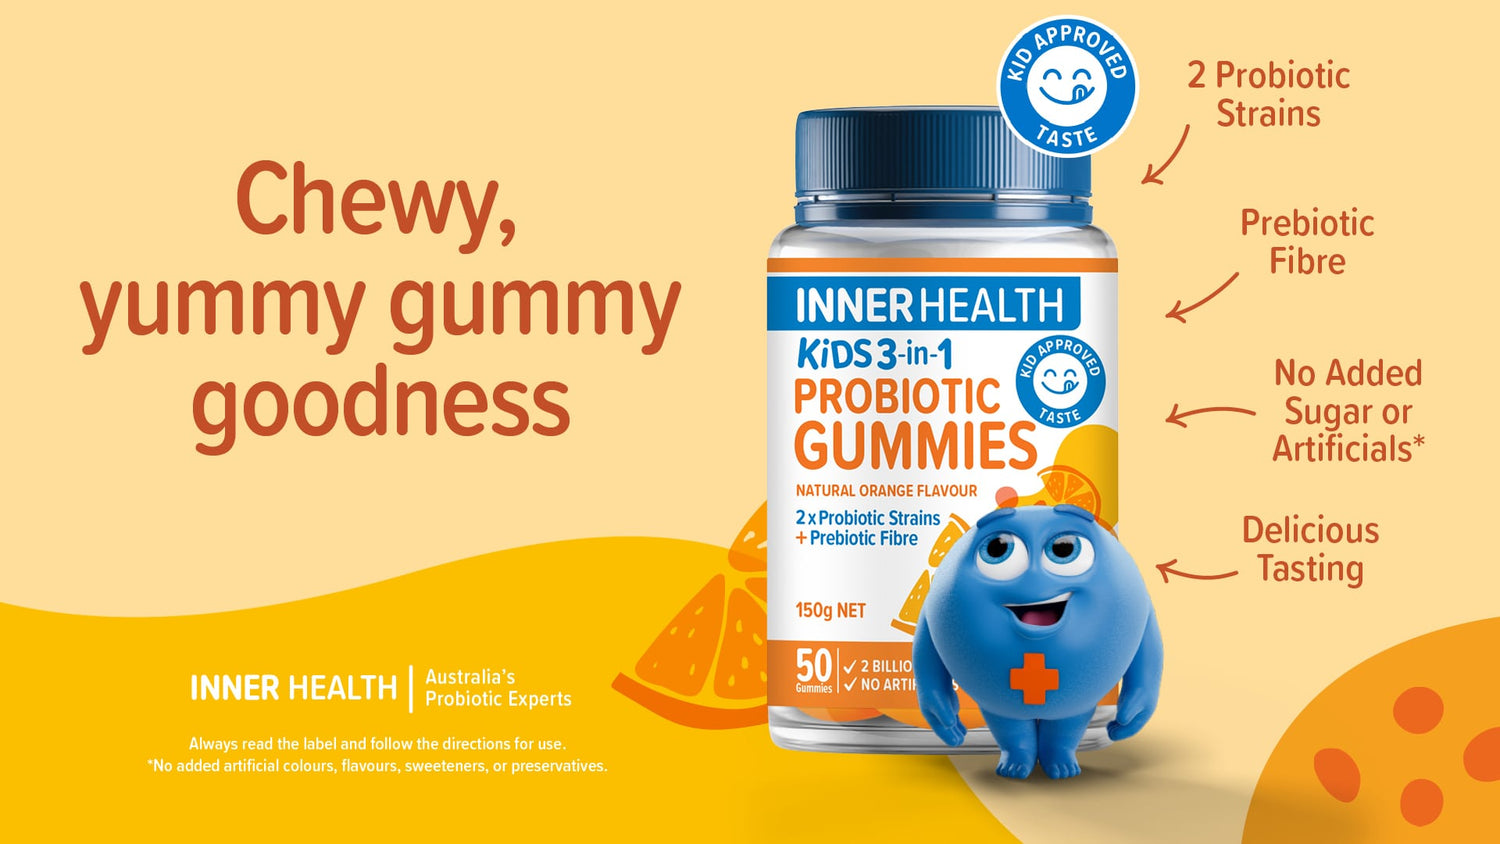 Kids Approved Taste: Chewy yummy gummy goodness | 2 Probiotic strains, prebiotic fibre, no added sugar or artificials*, delicious tasting.